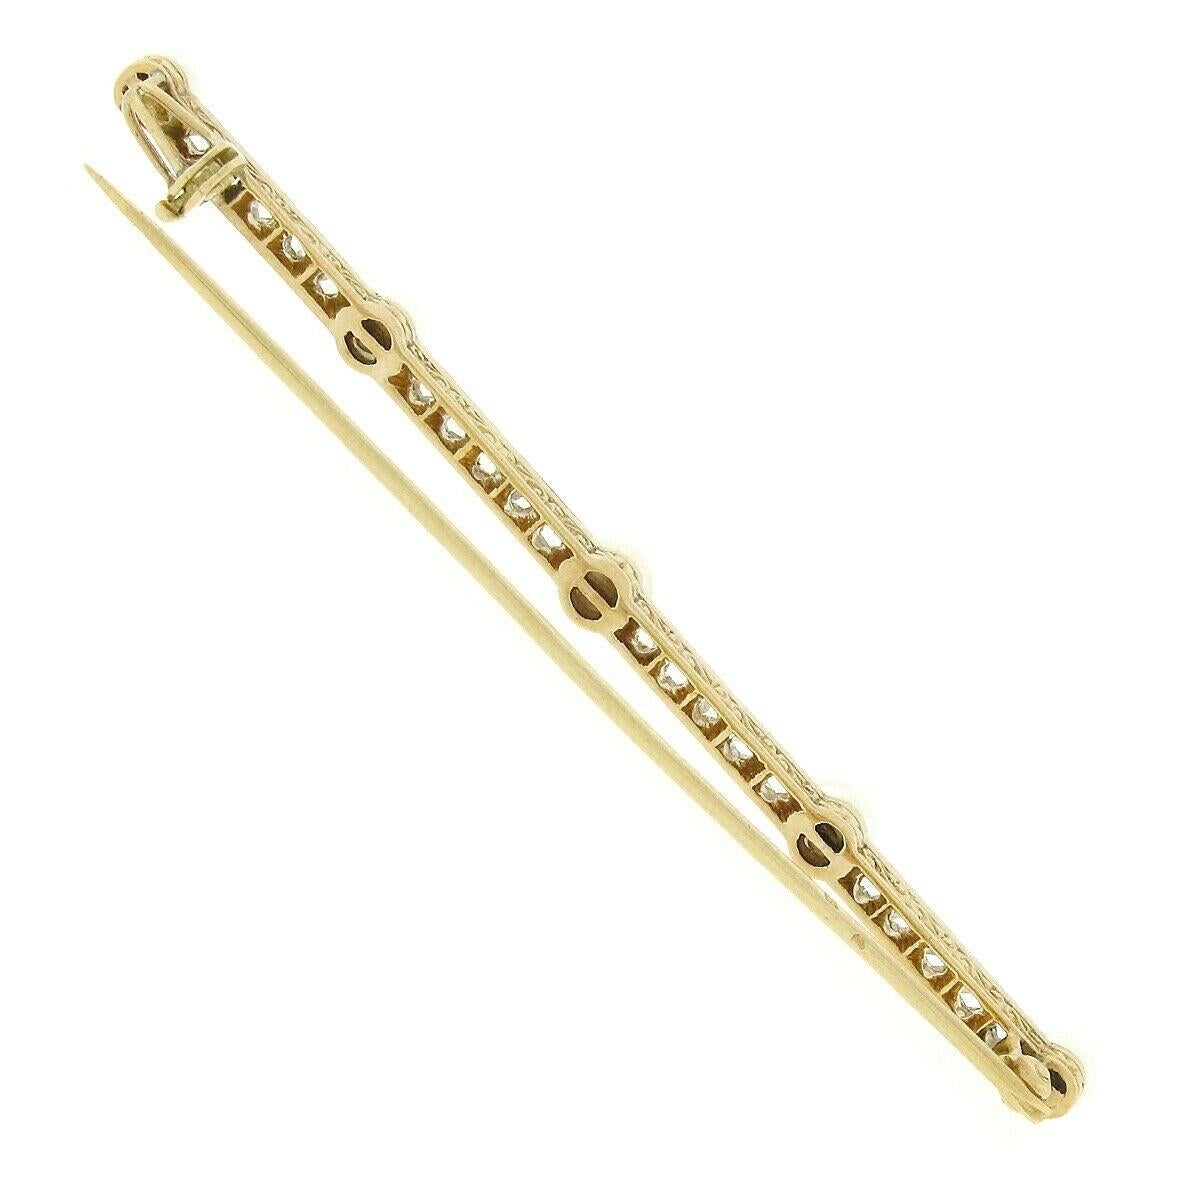 Antique Edwardian French 18k Gold & Platinum 0.80ct Diamond Pearl Bar Pin Brooch In Good Condition For Sale In Montclair, NJ